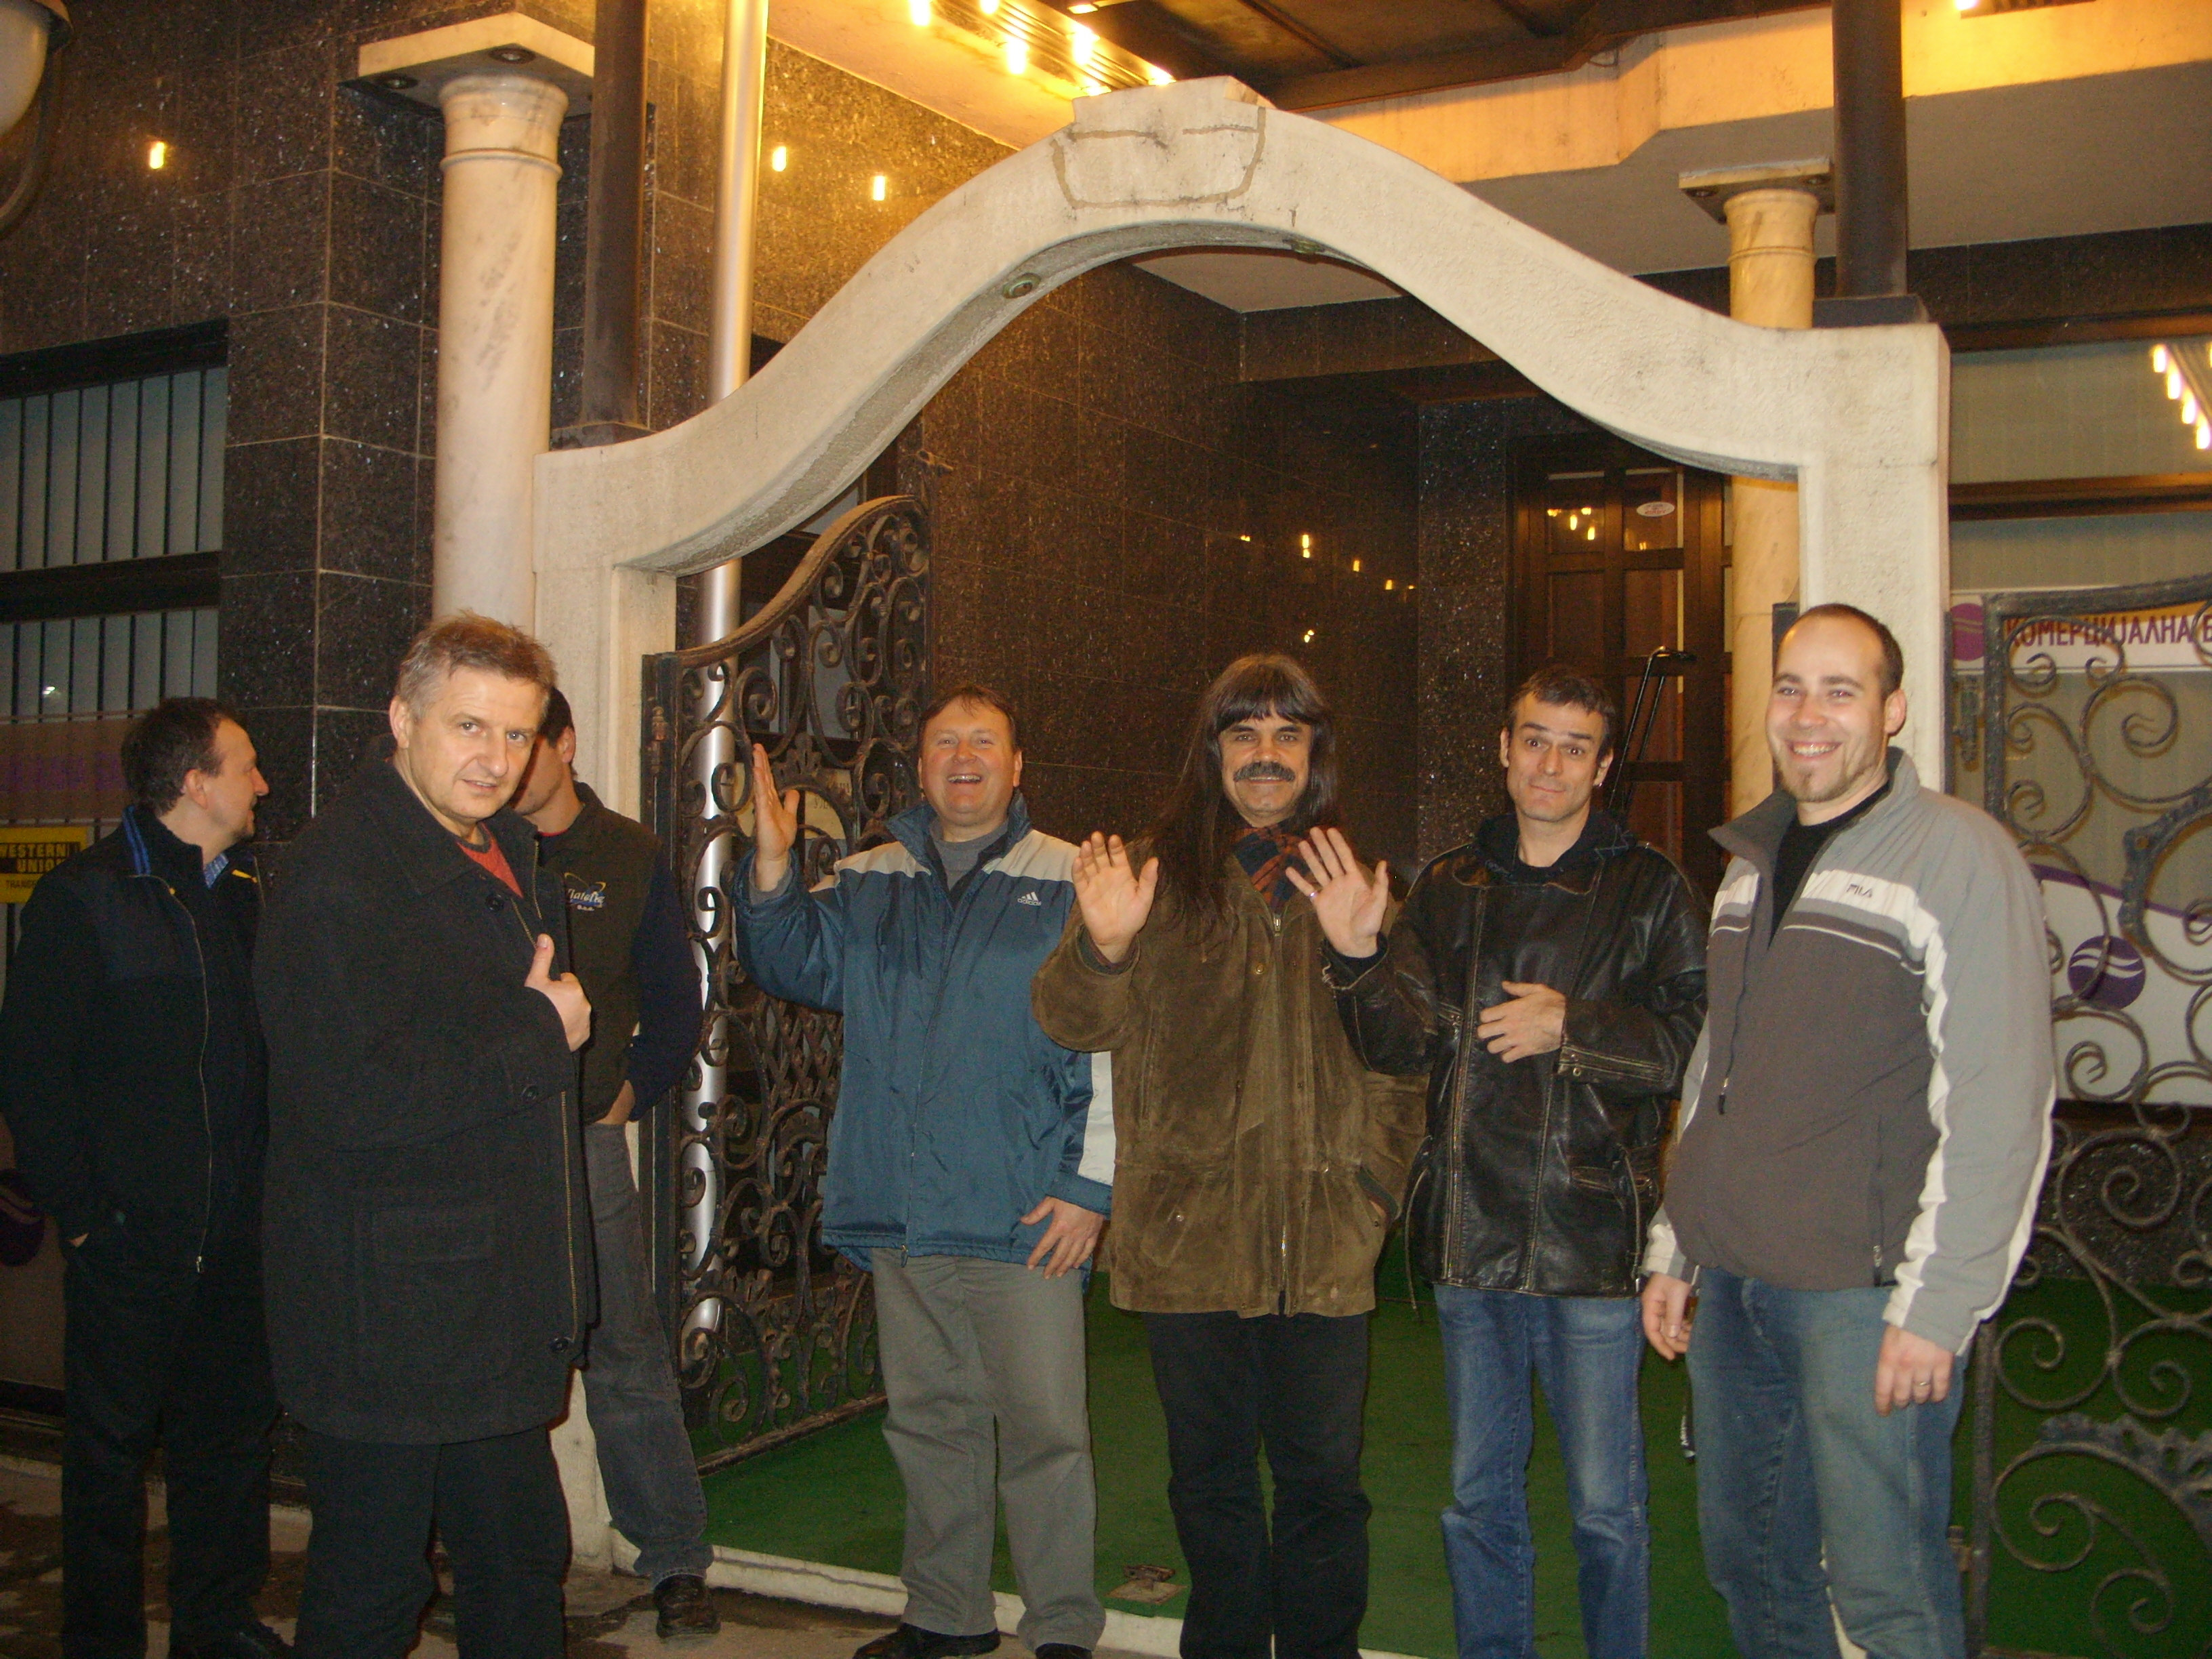 Group members with the staff in front of the Hotel